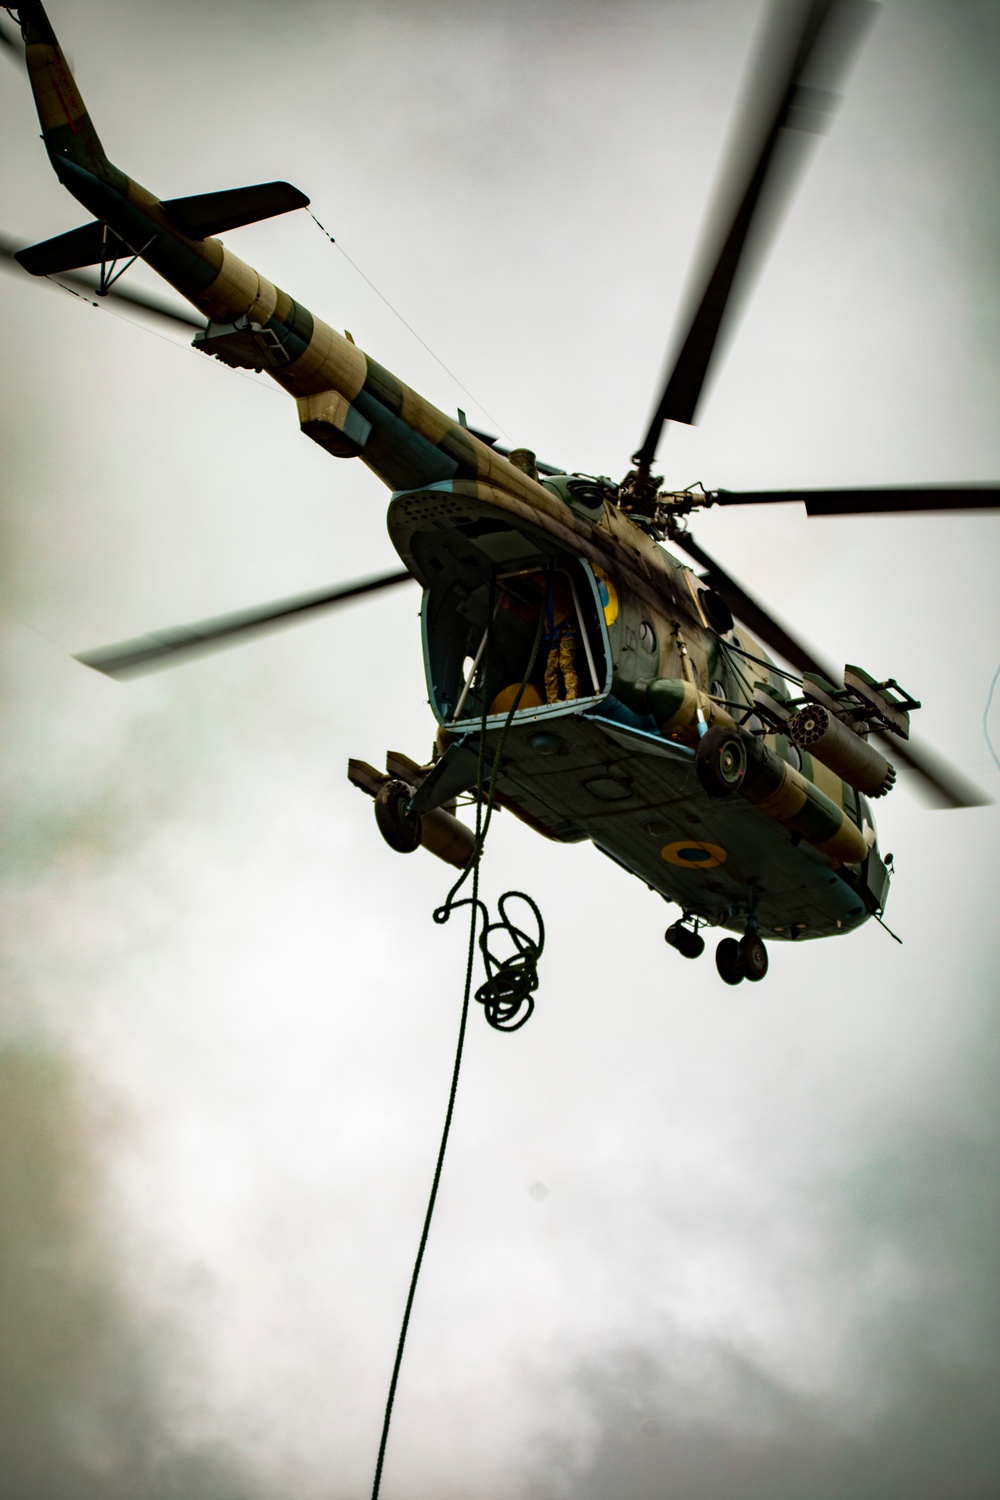 Ukrainian soldiers fast rope from a MI-8 helicopter